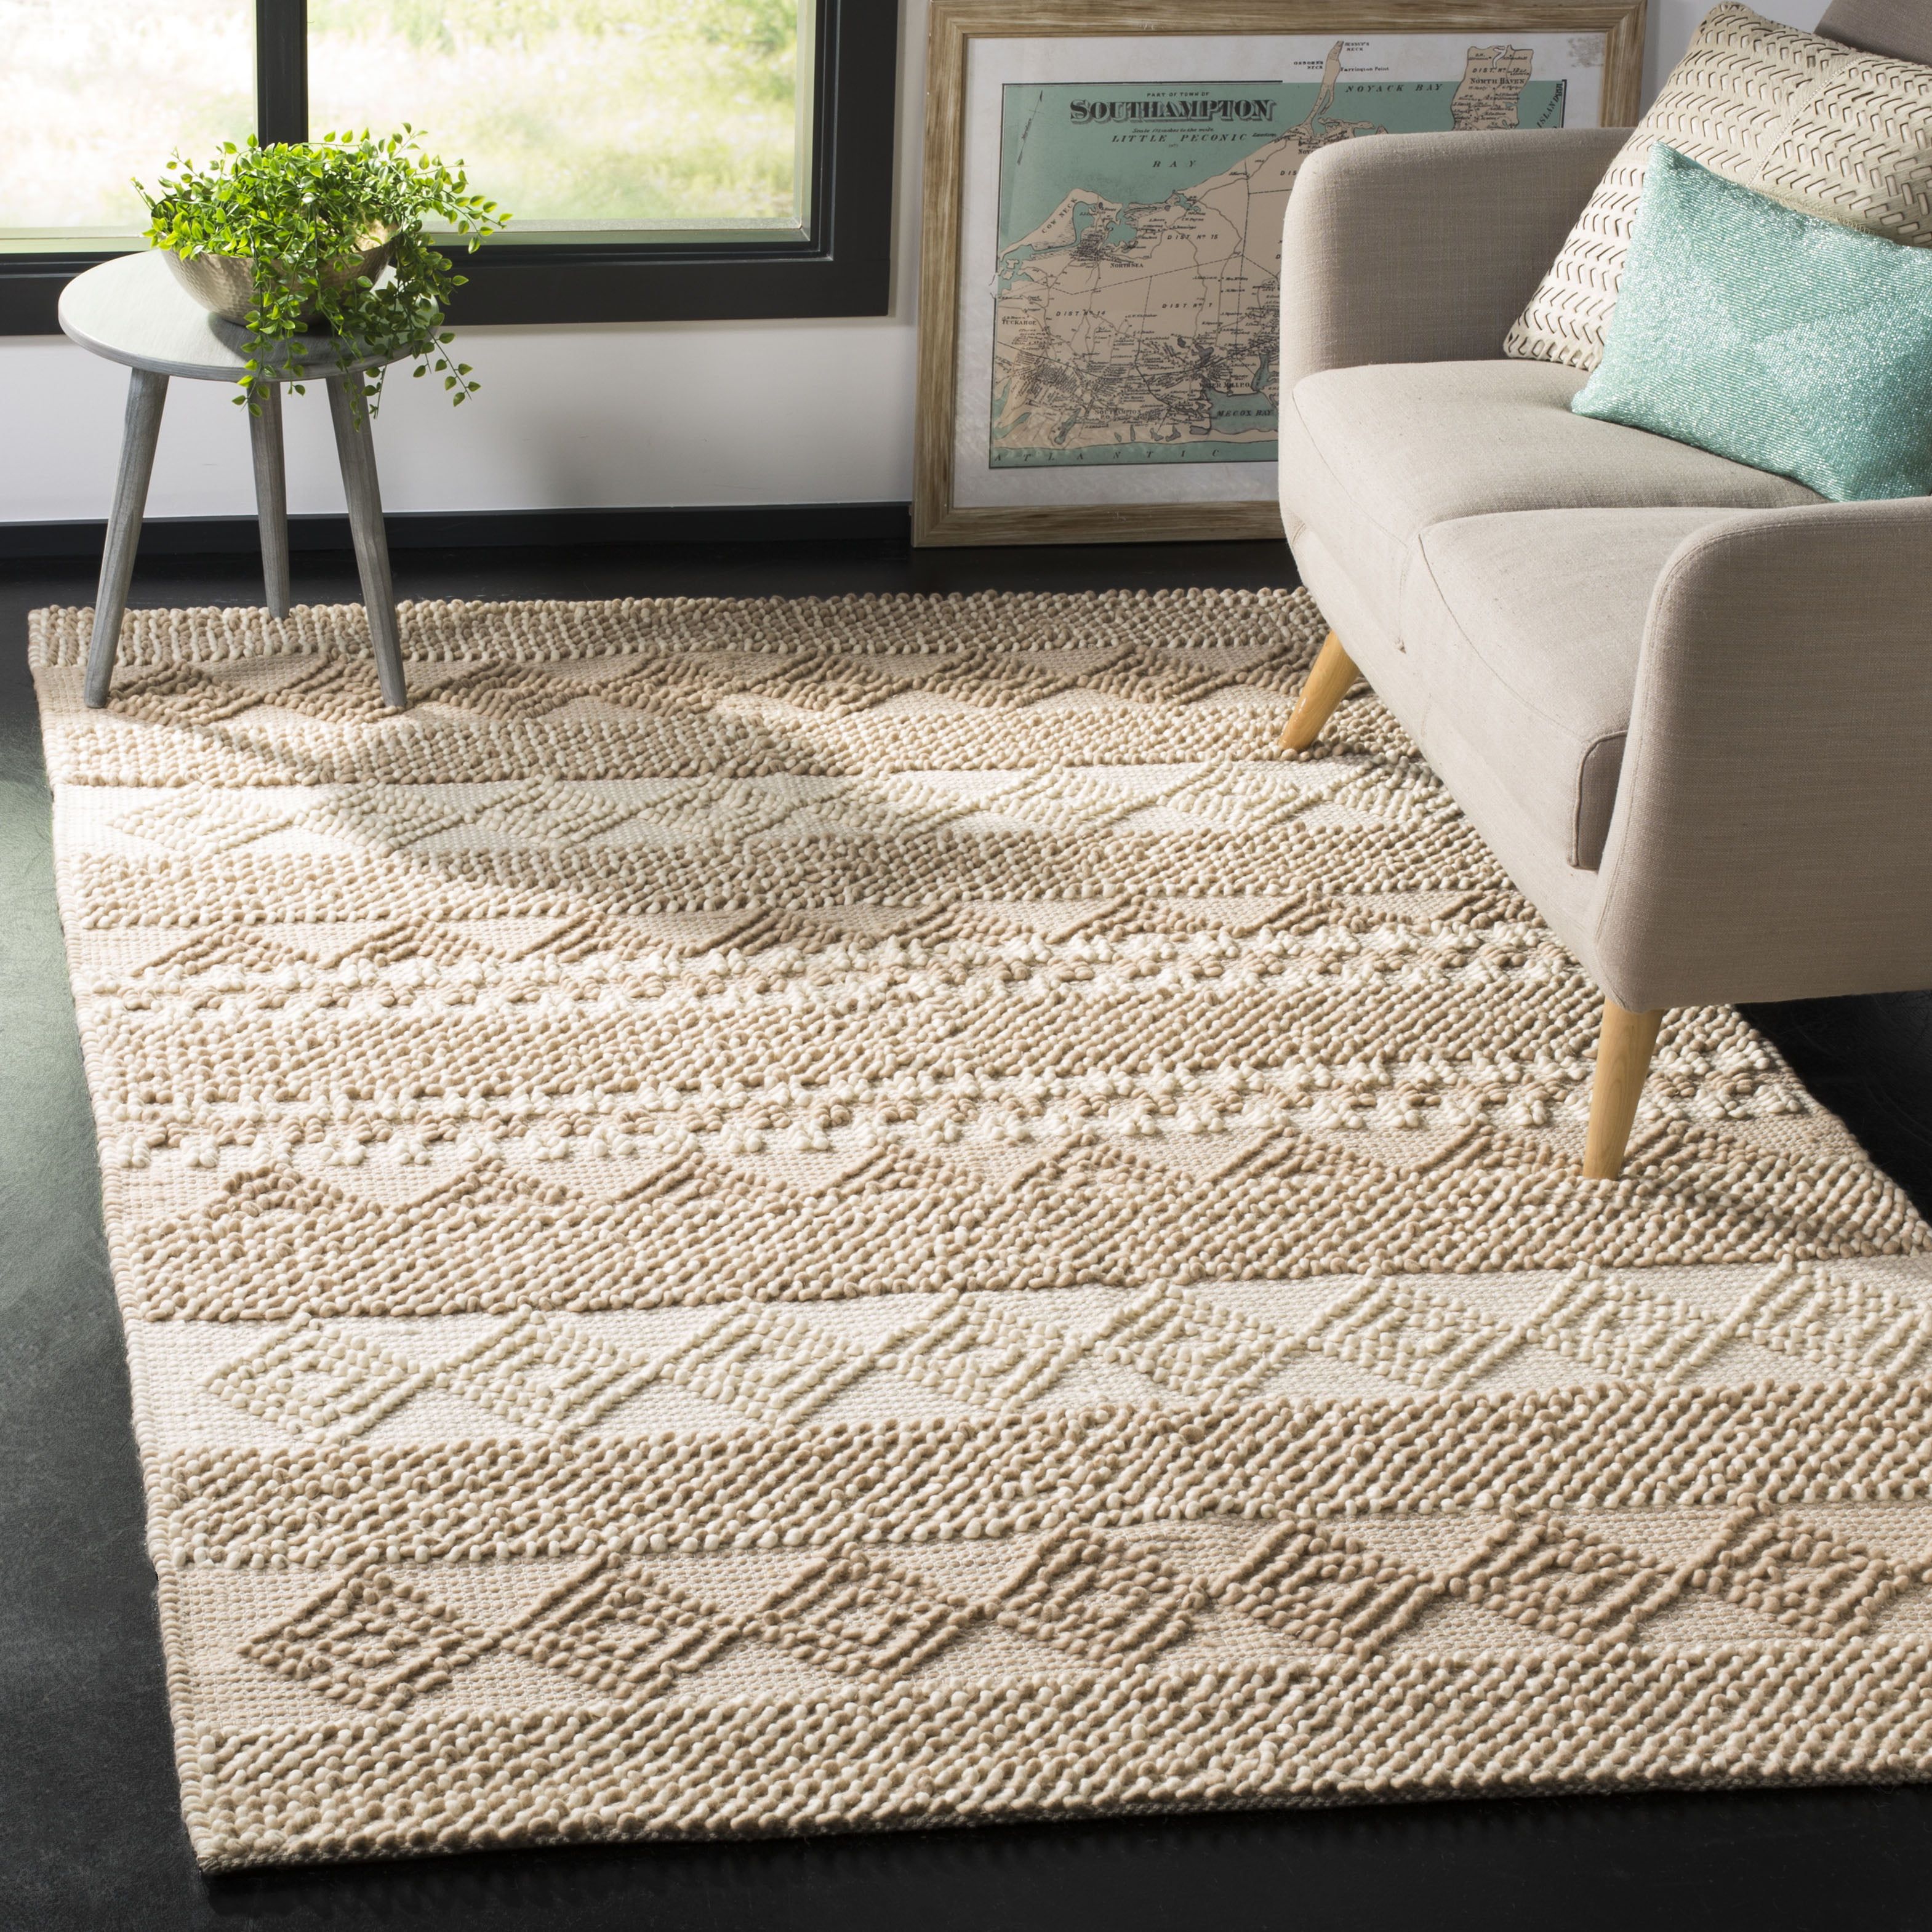 Safavieh Natura Carly Geometric Braided Wool Area Rug, Beige/Ivory, 9' X  12' – Walmart Intended For Beige Rugs (View 6 of 15)